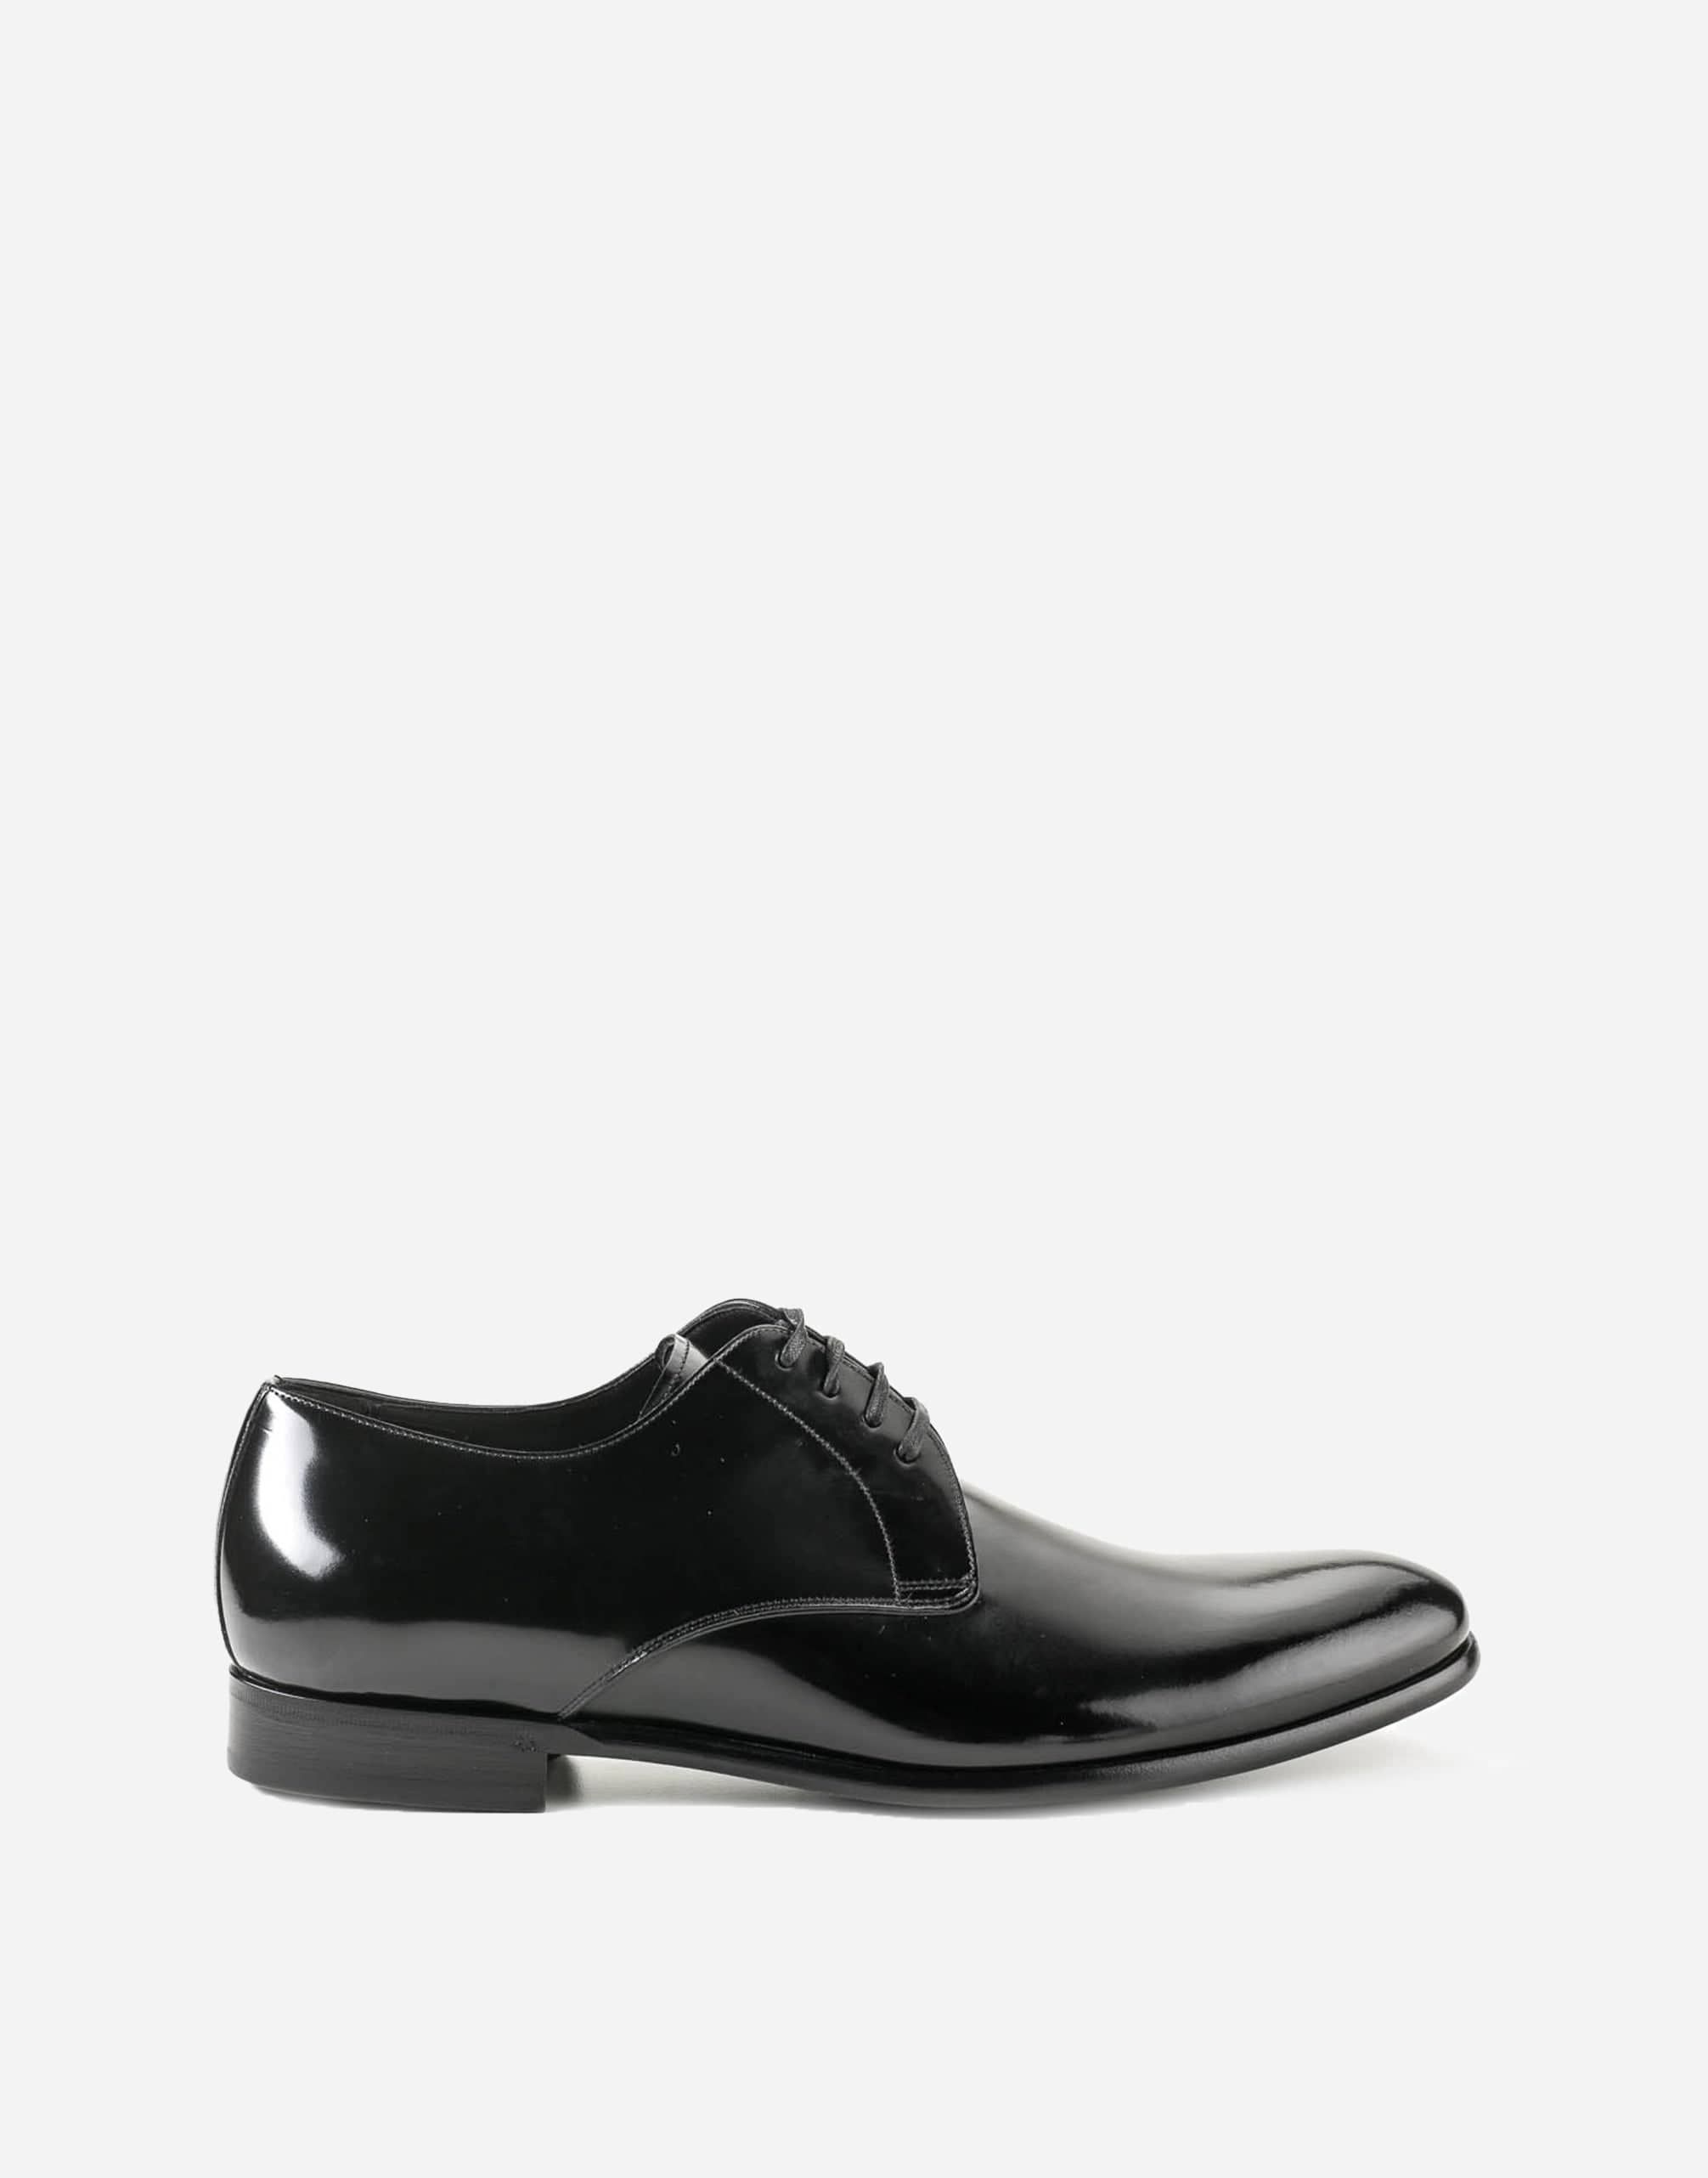 Dolce & Gabbana Formal Derby Shoes In Calfskin Leather